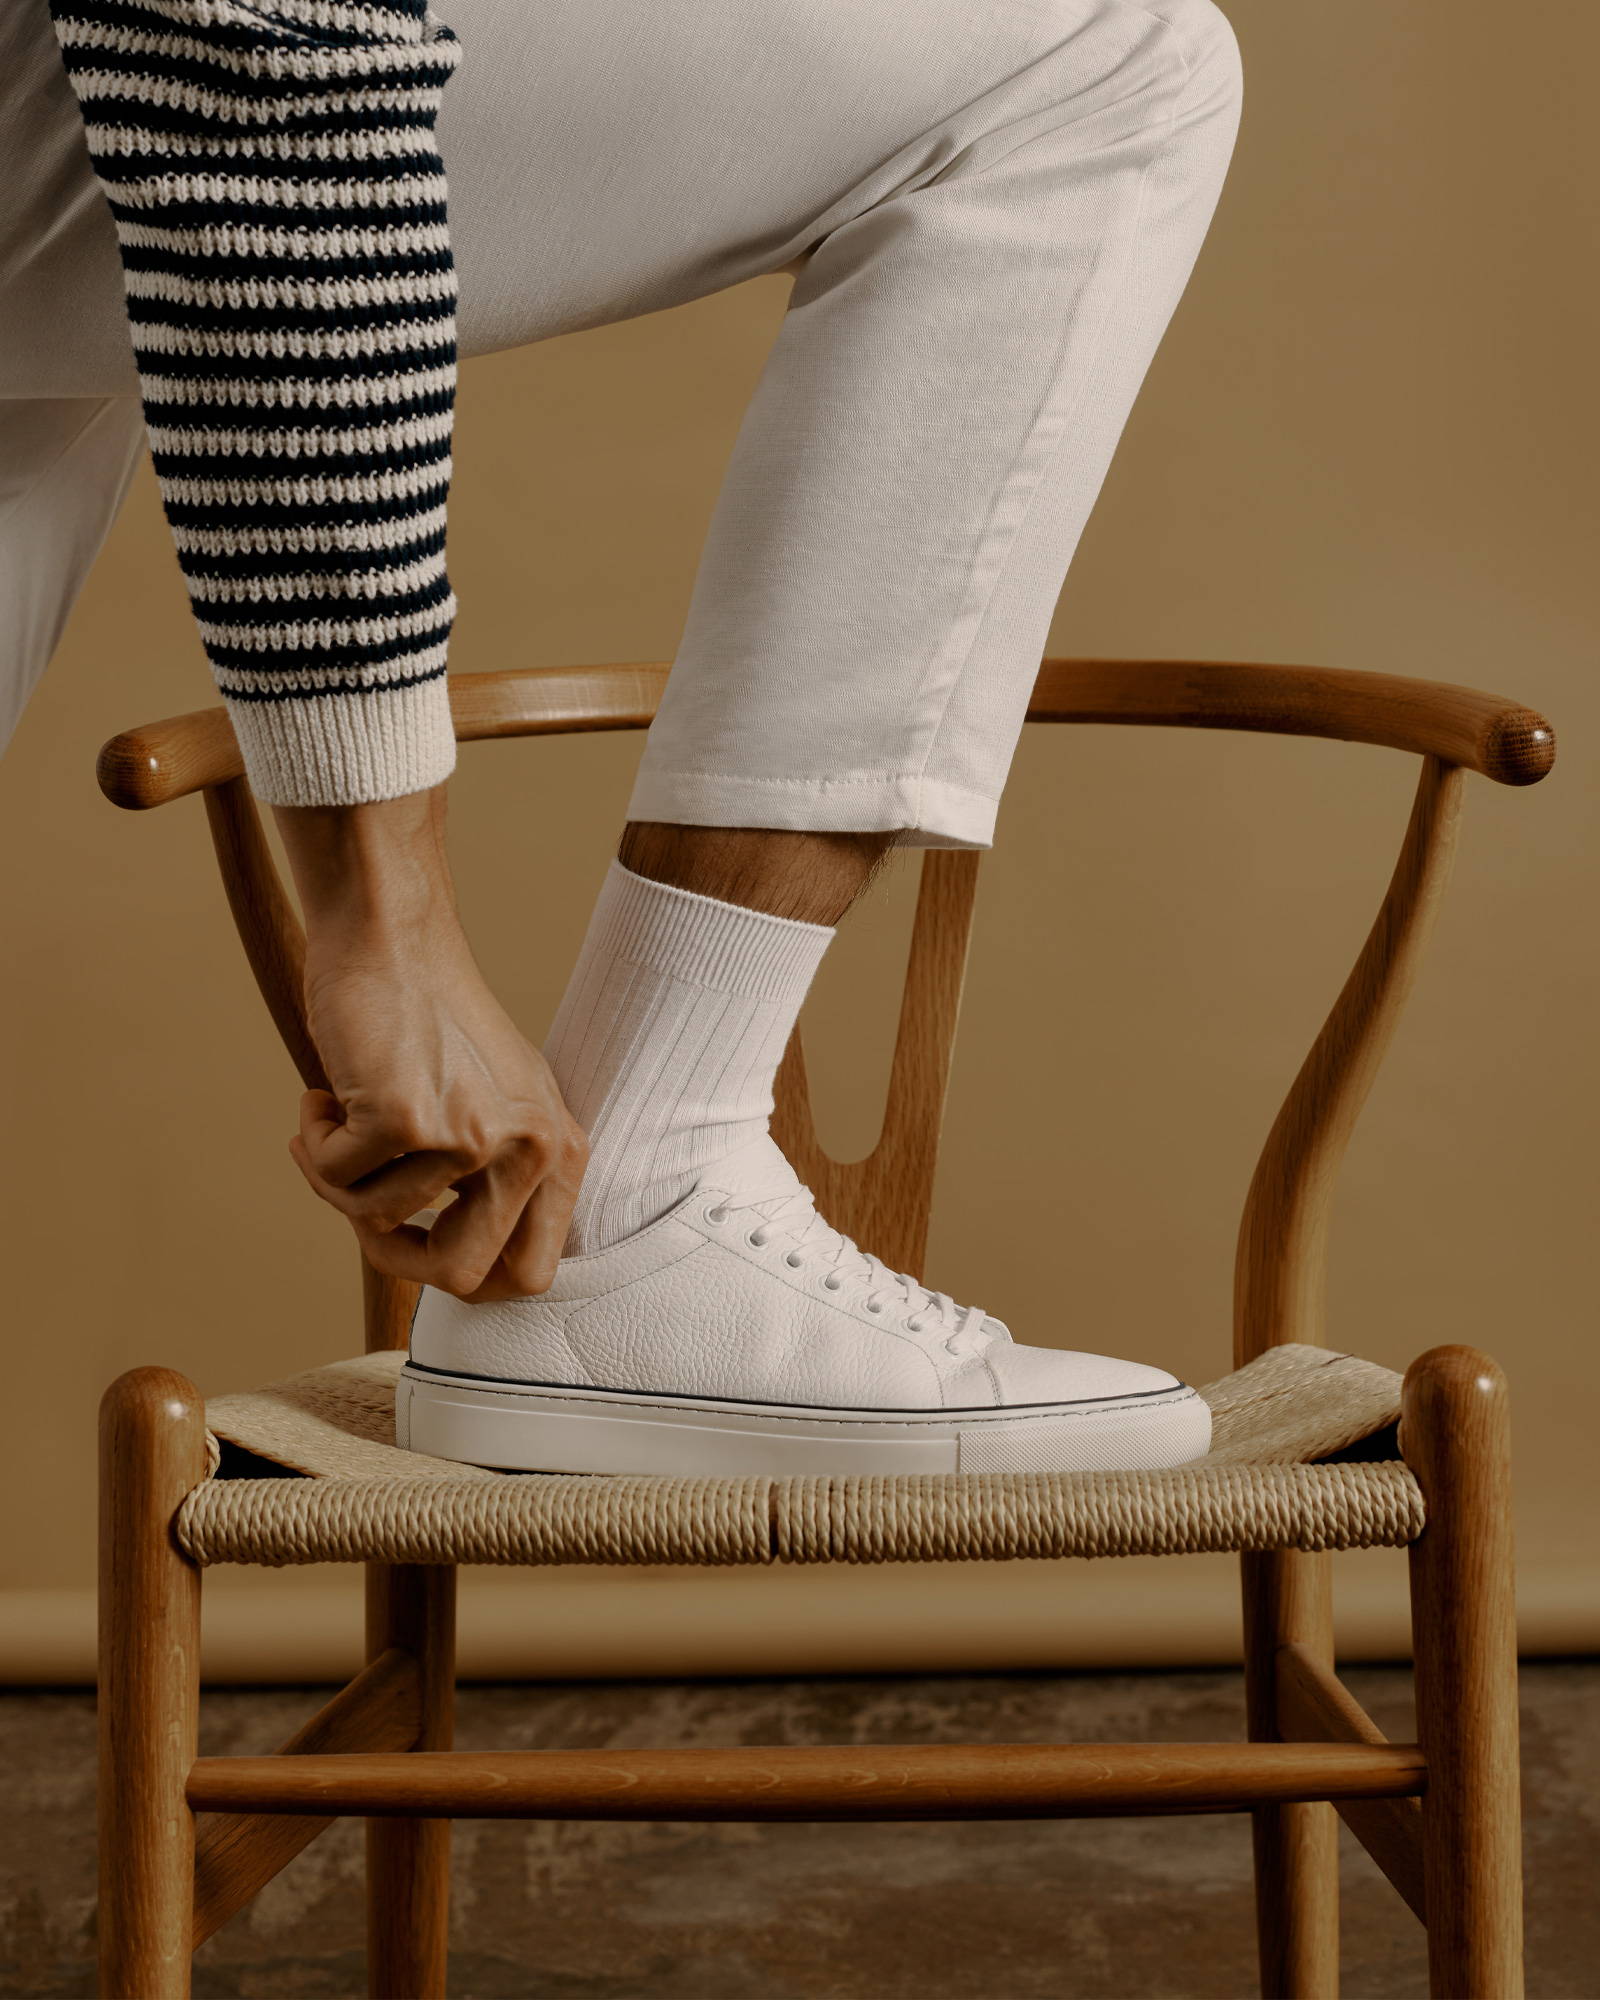 The Royale White Sneakers worn with cream chinos and a stripe knit